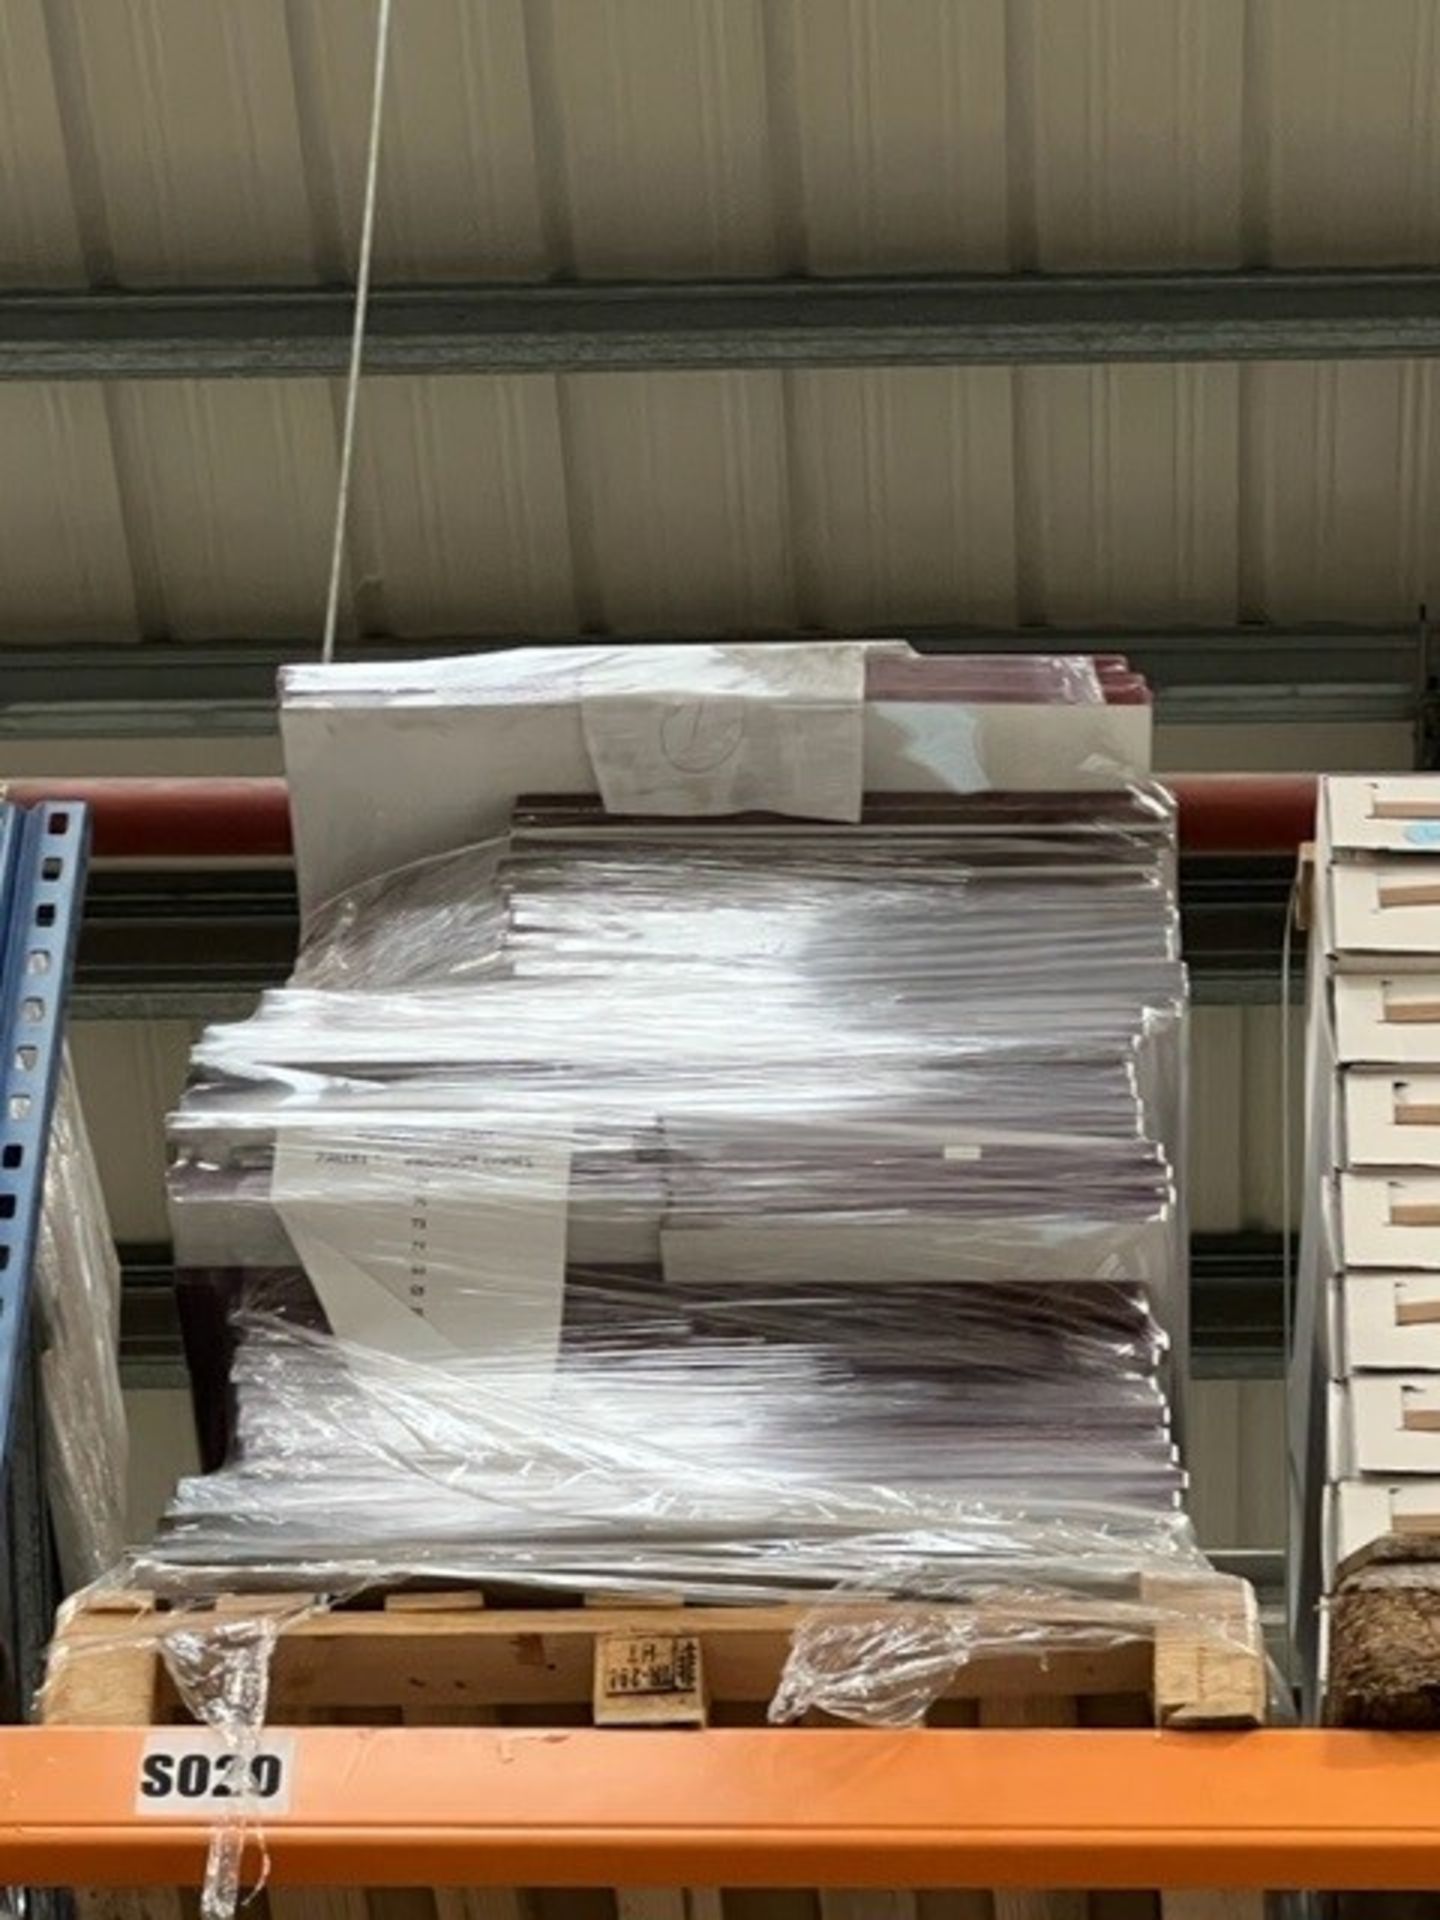 28 x pallets of kitchen doors/drawer fronts in black gloss, burgundy gloss, white, cream gloss, - Image 16 of 28